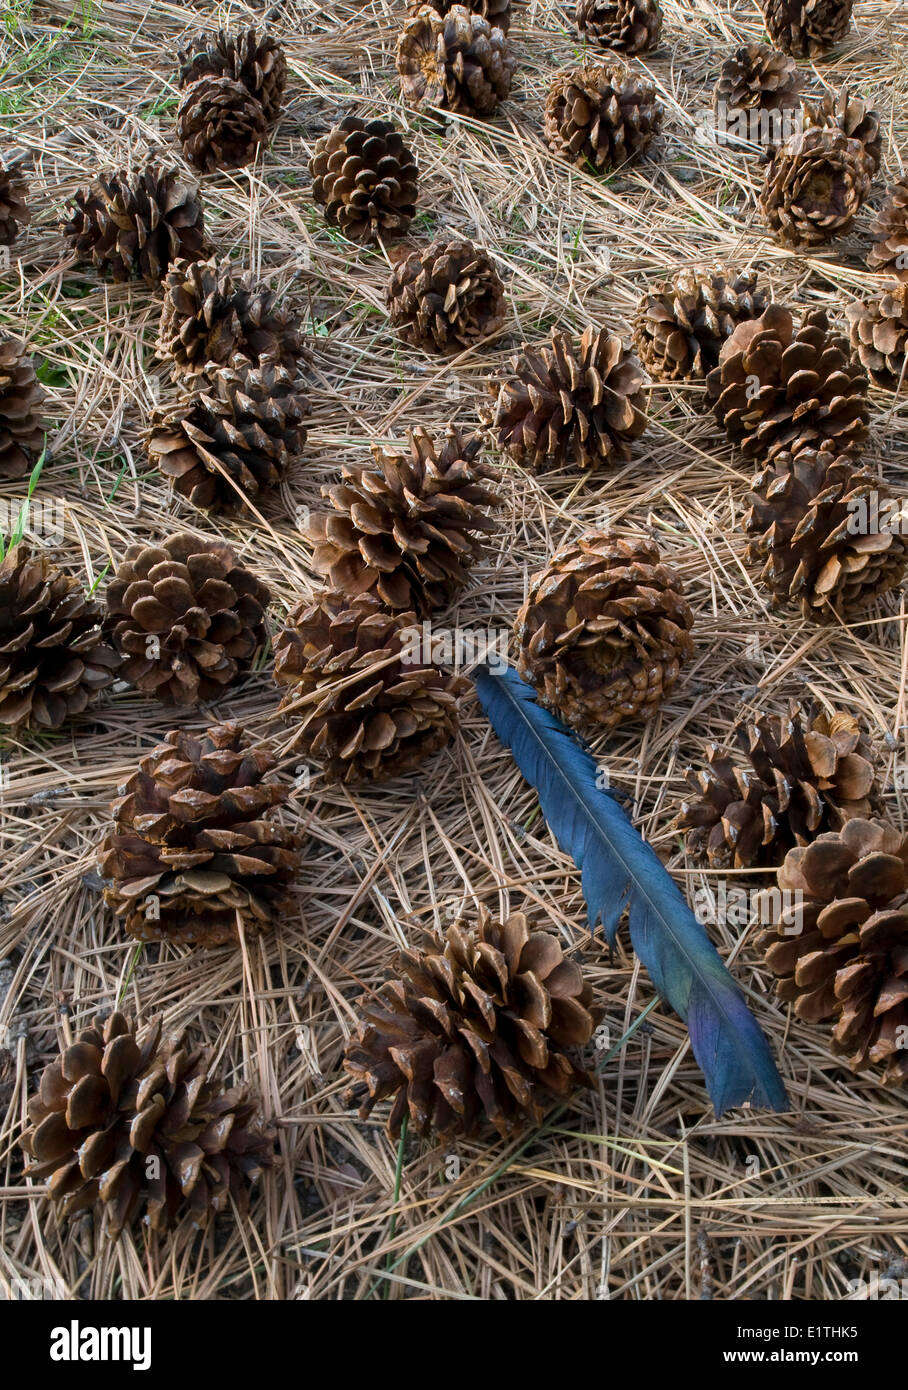 ponderosa pine Pinus ponderosa cones with a feather black-billed magpie Pica hudsonia  in ponderosa pine forest  Stemwider Stock Photo